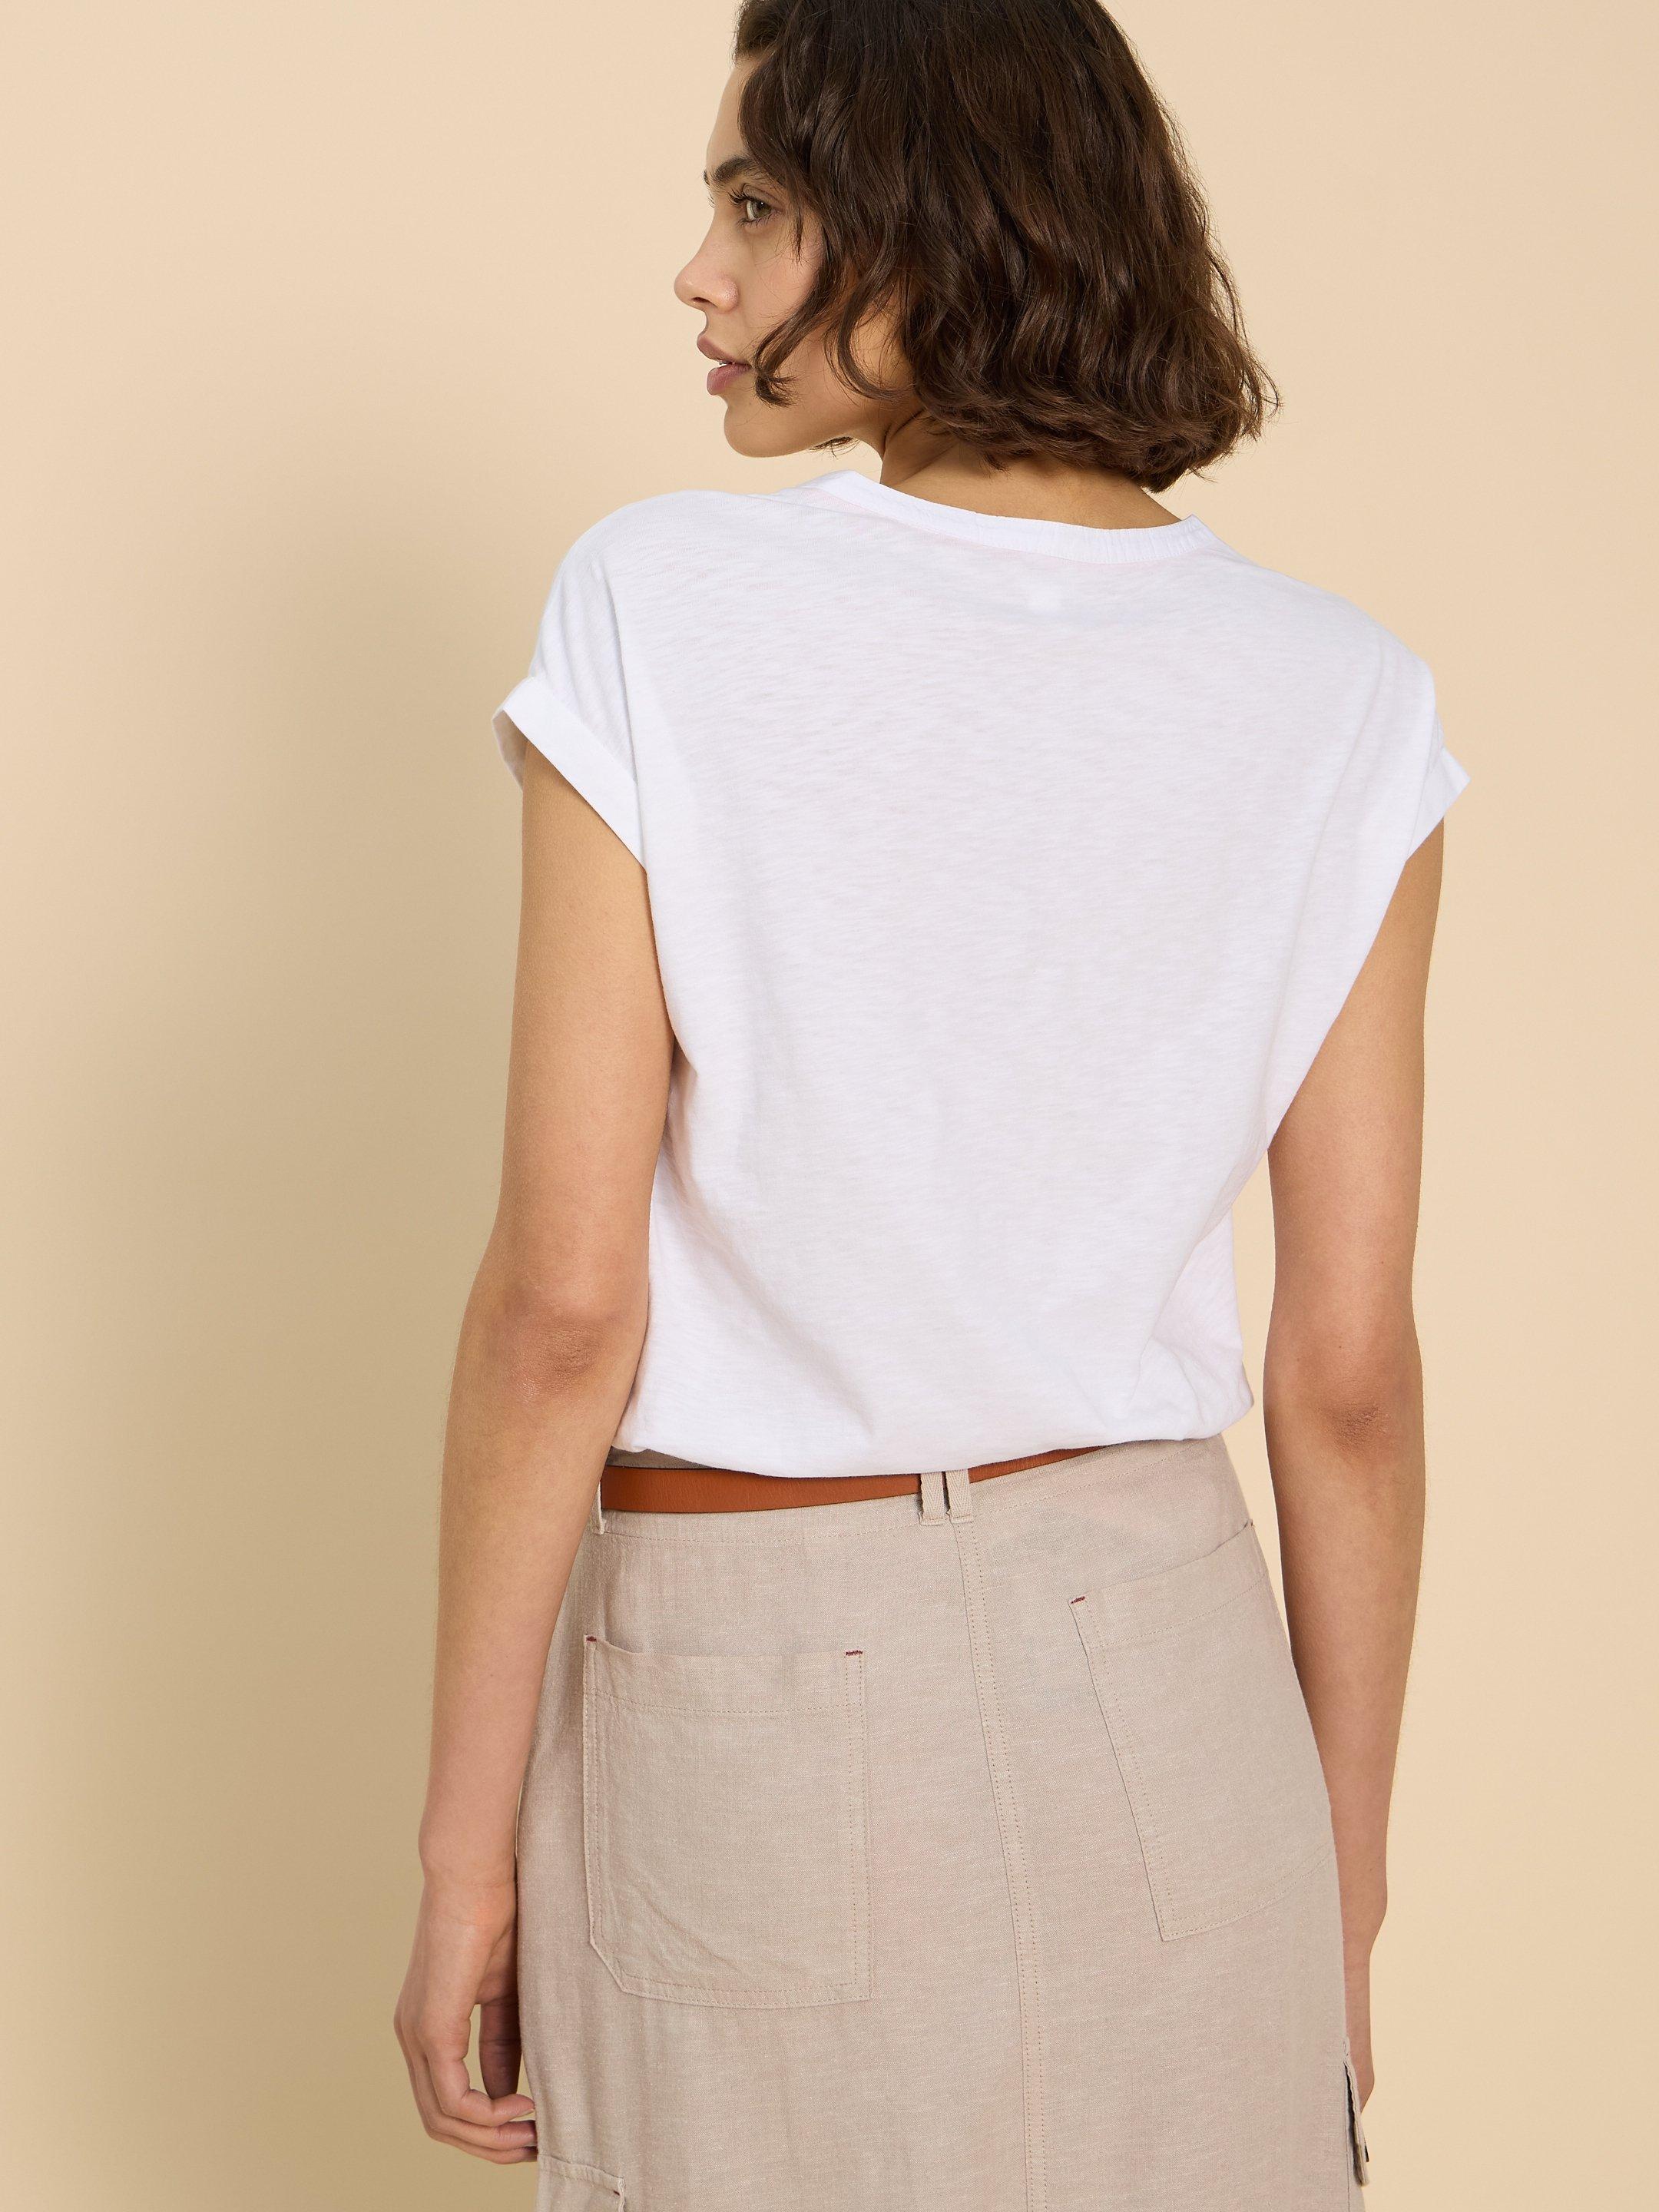 BETH JERSEY SHIRT in BRIL WHITE - MODEL BACK